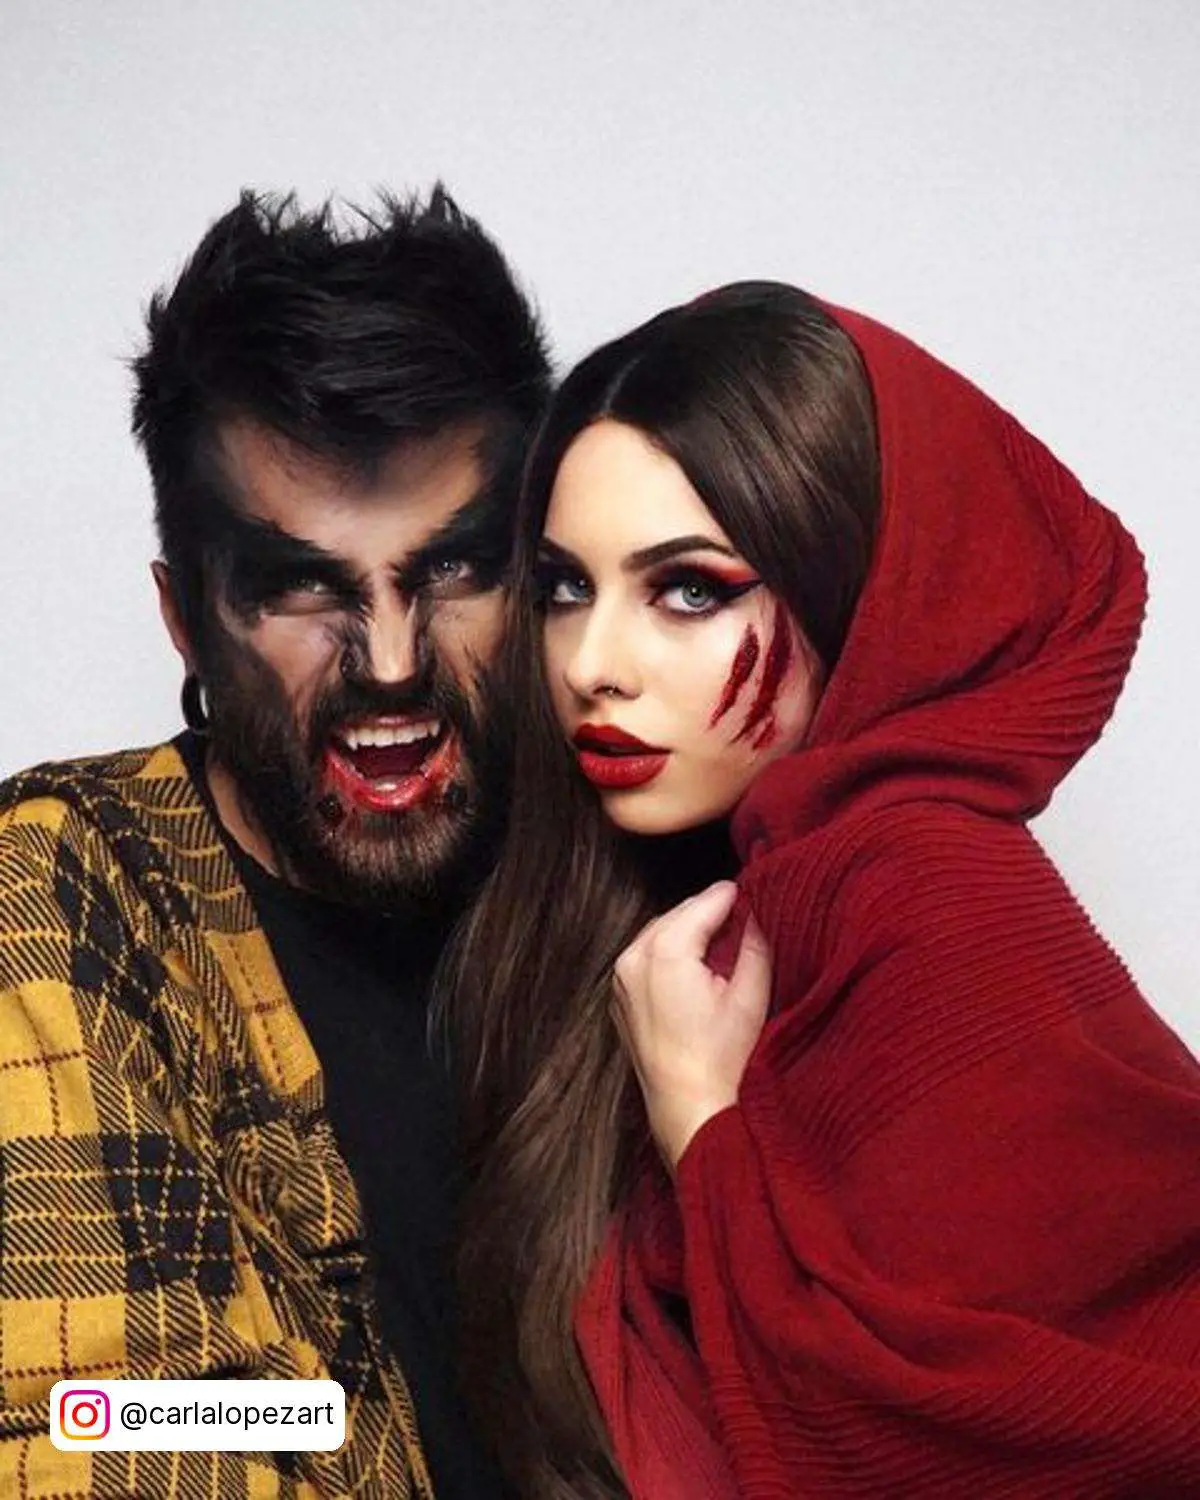 Little Red Riding Hood Halloween Couples Costume